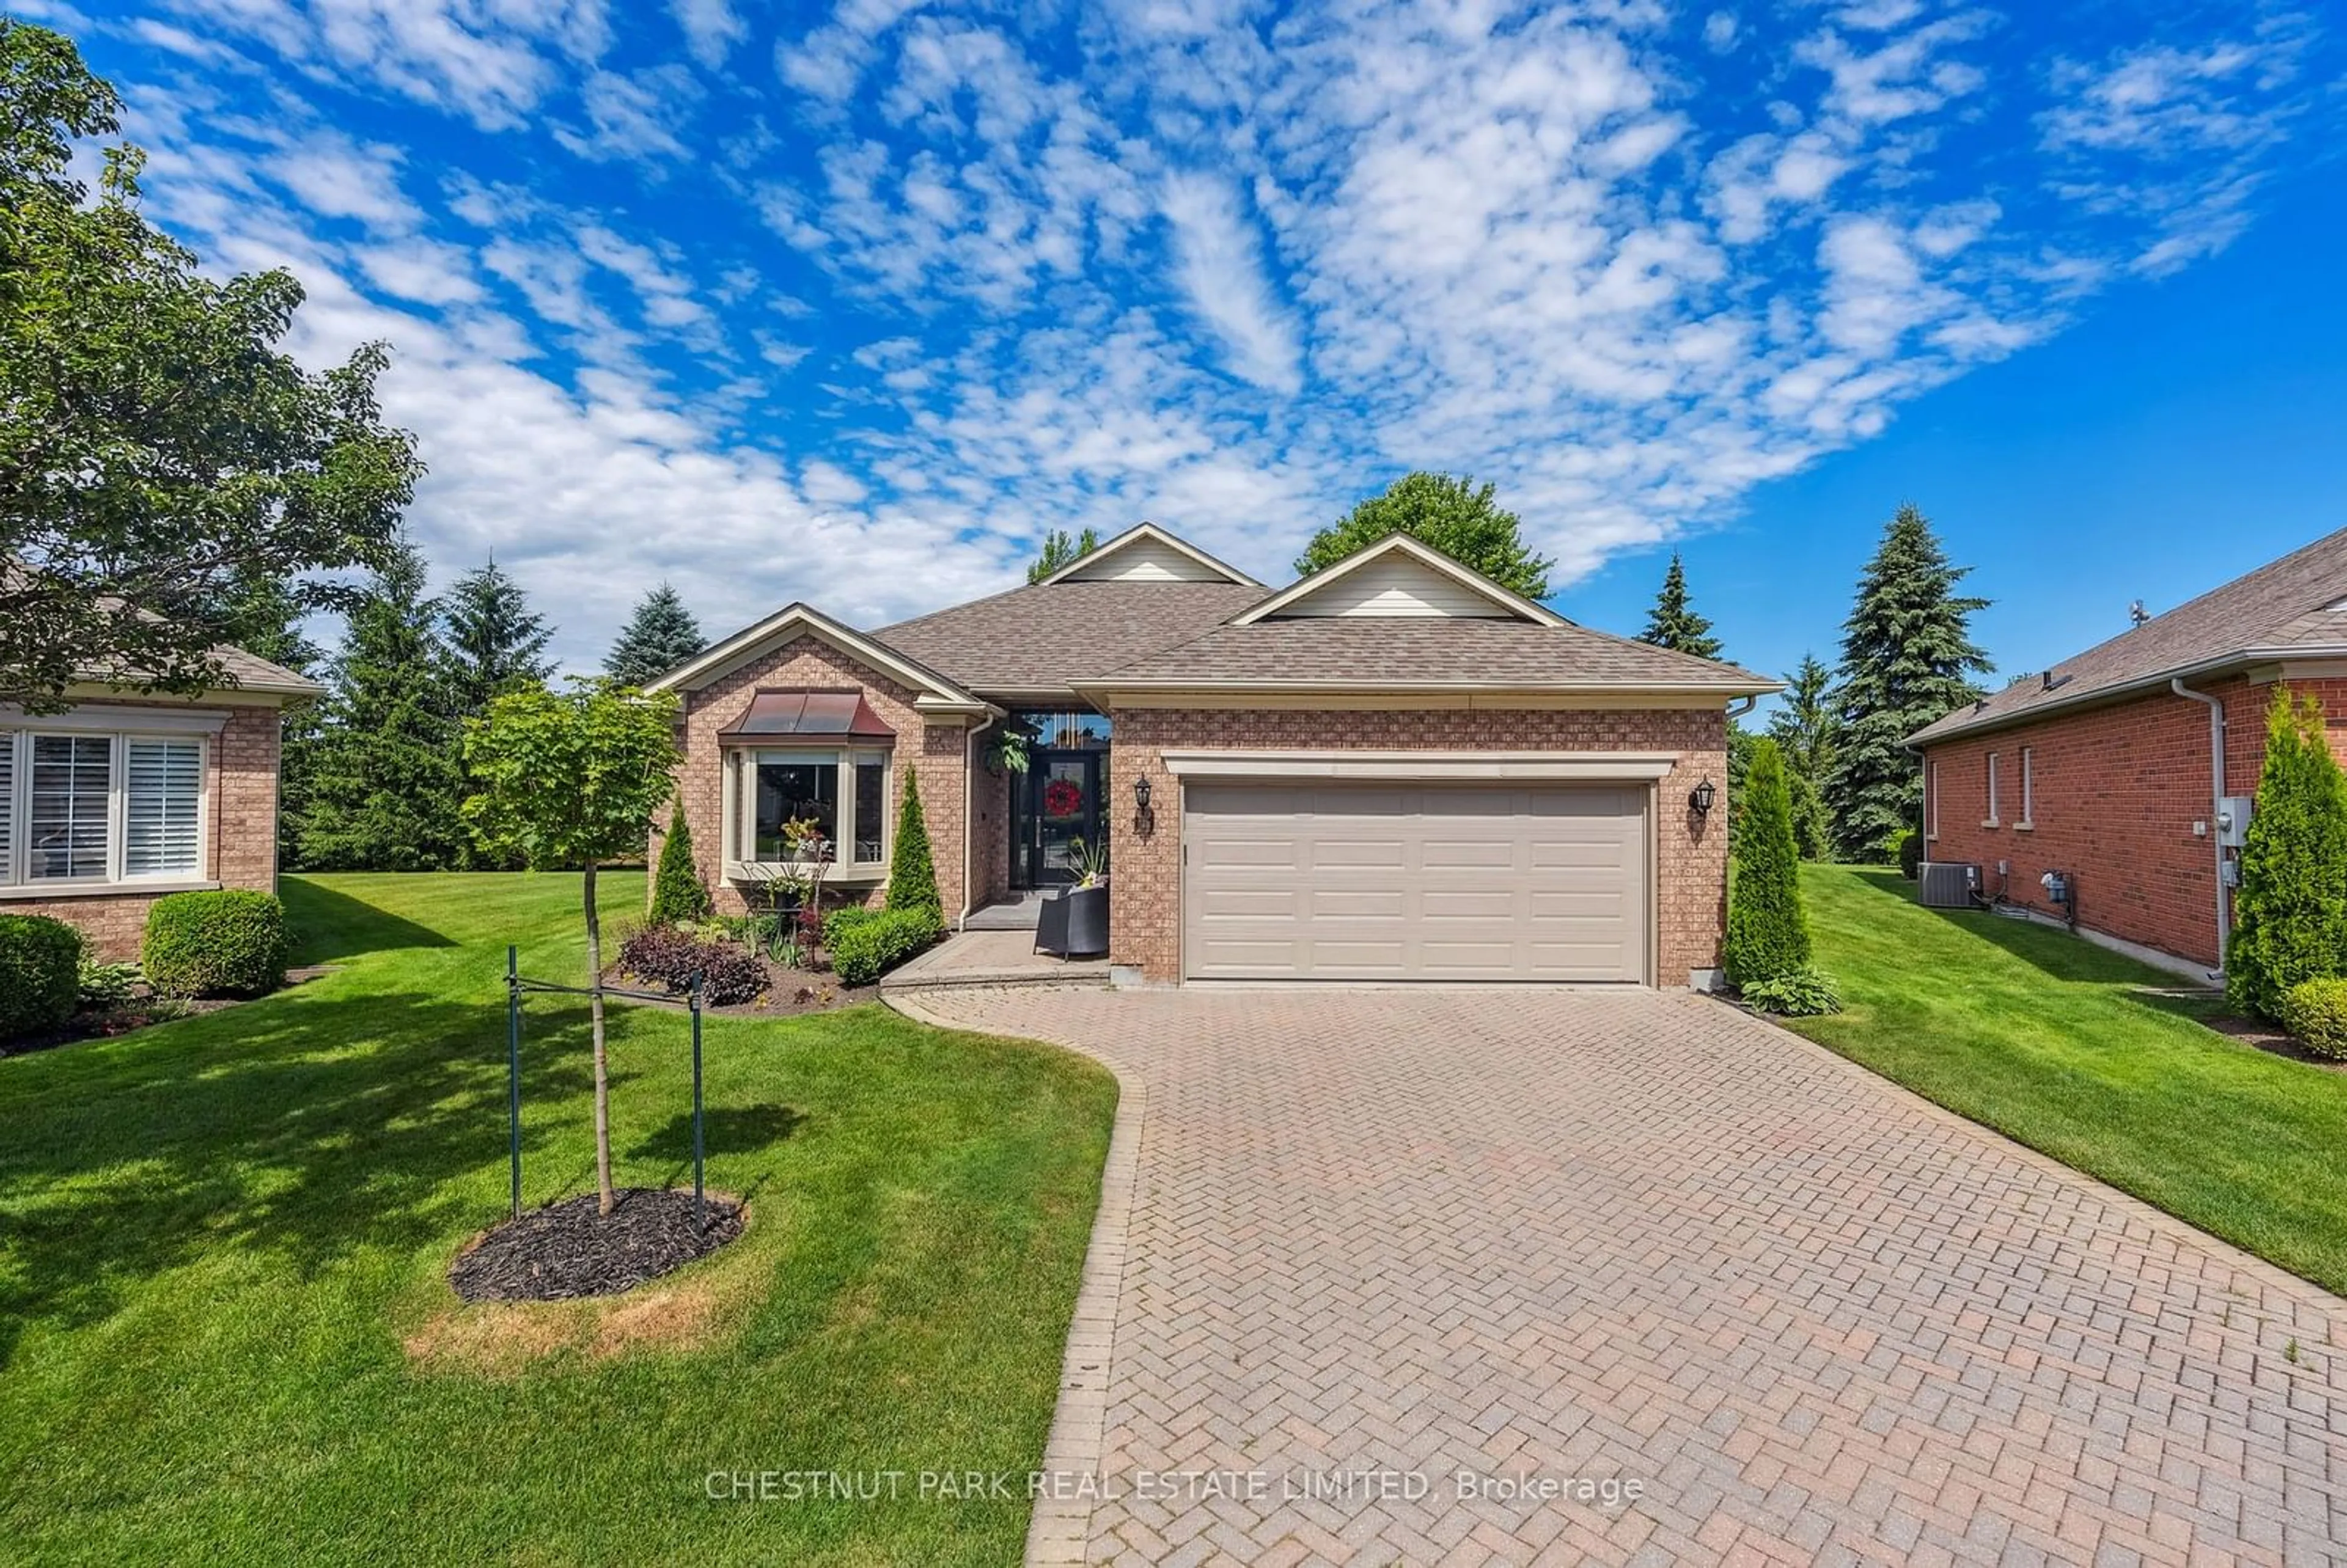 Home with brick exterior material for 11 Jacks Round, Whitchurch-Stouffville Ontario L4A 1L6